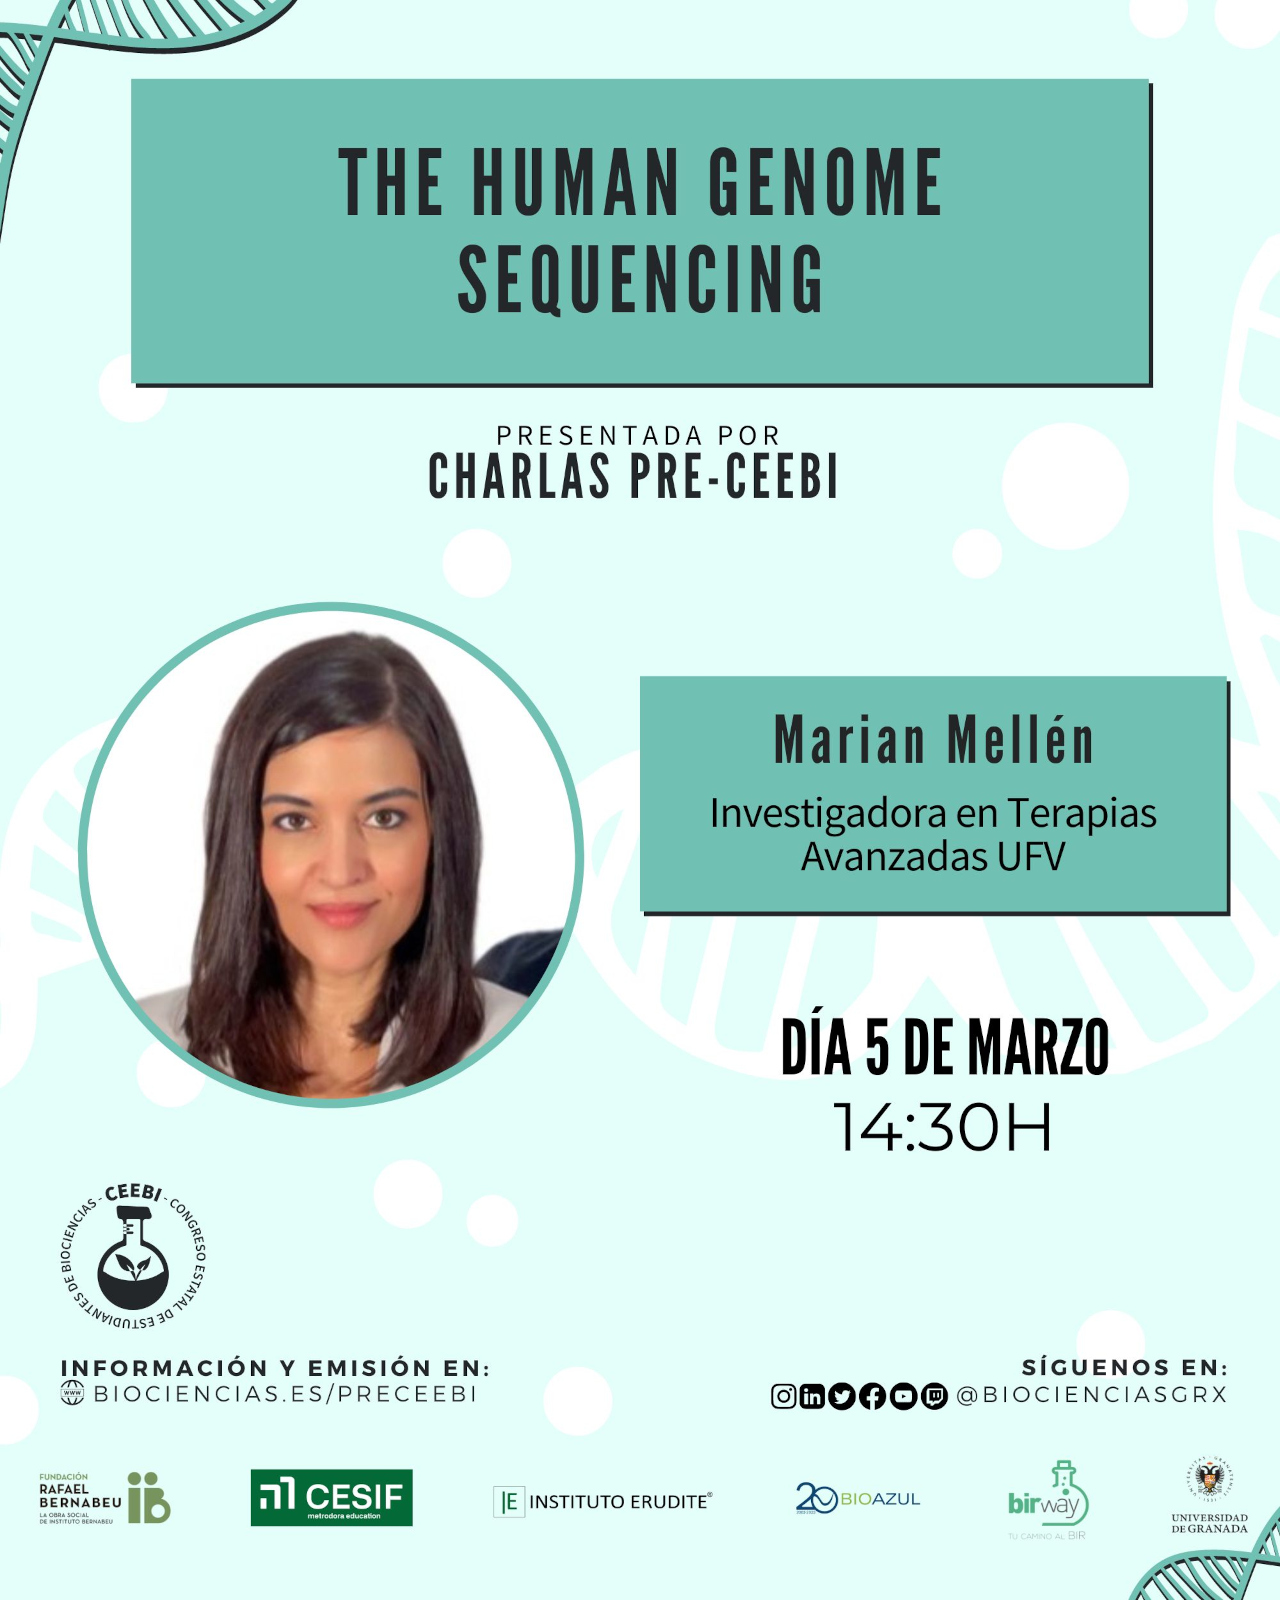 Charla online The Human Genome Sequencing